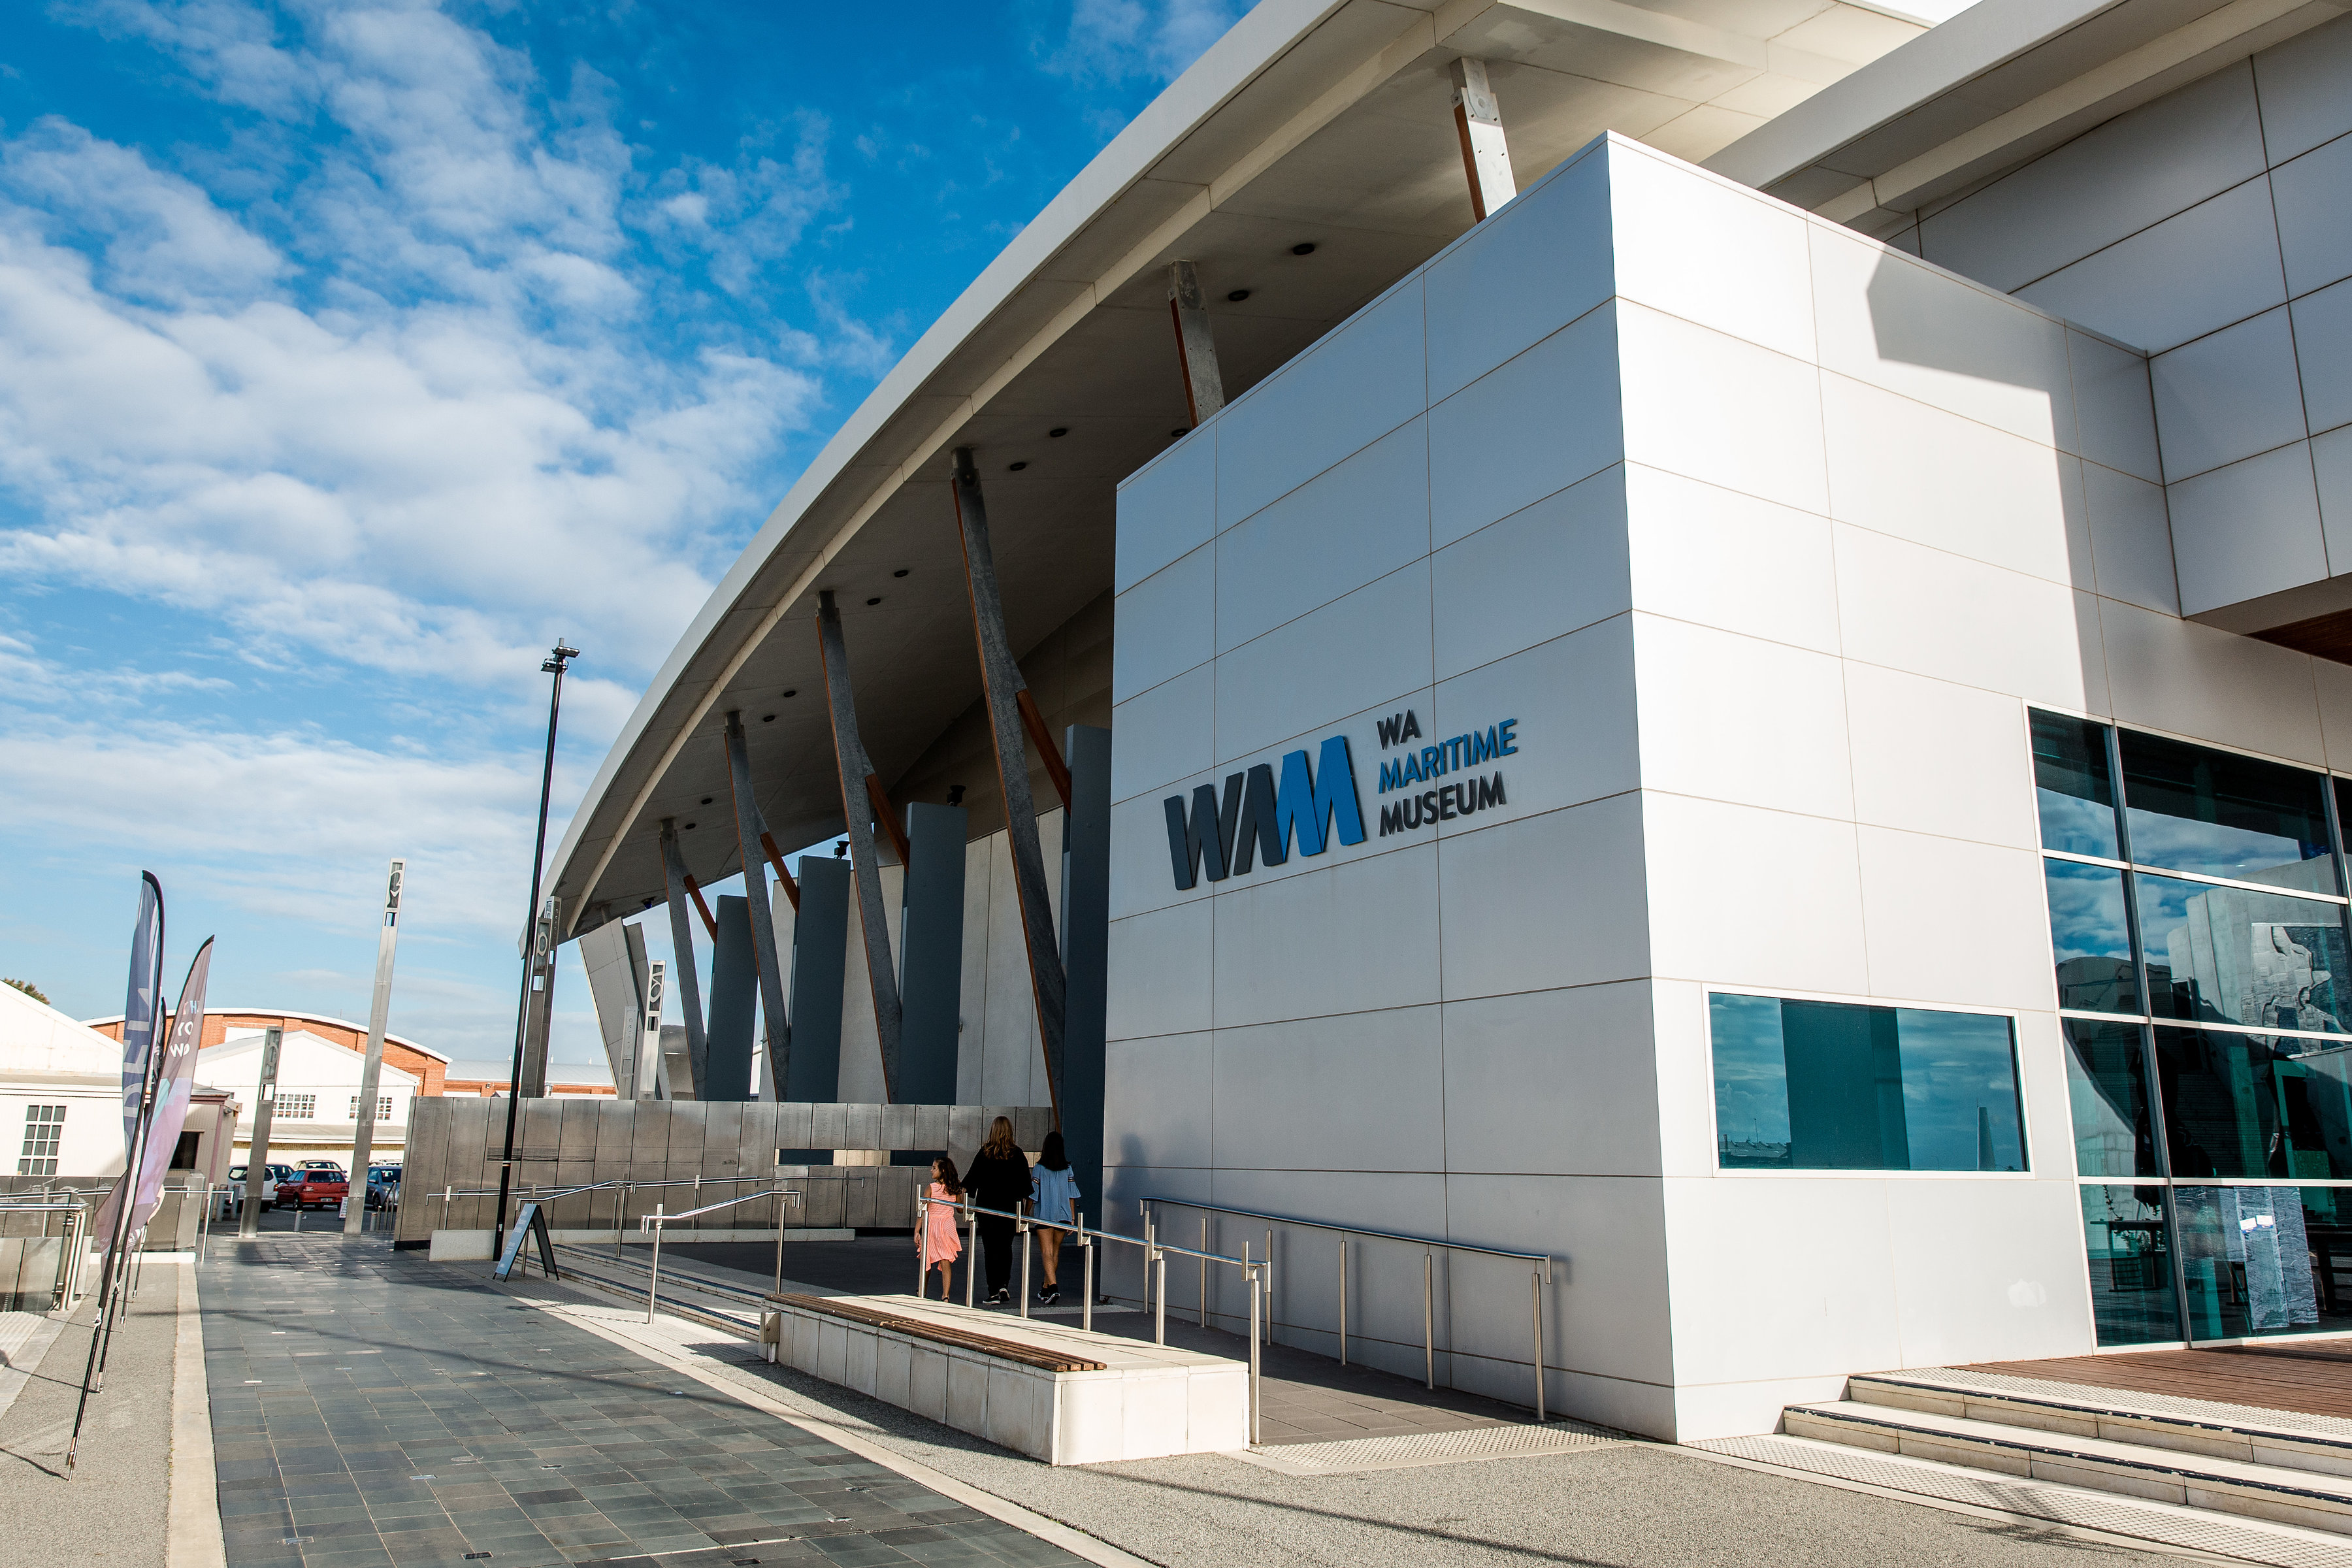 The entrance to the WA Maritime Museum